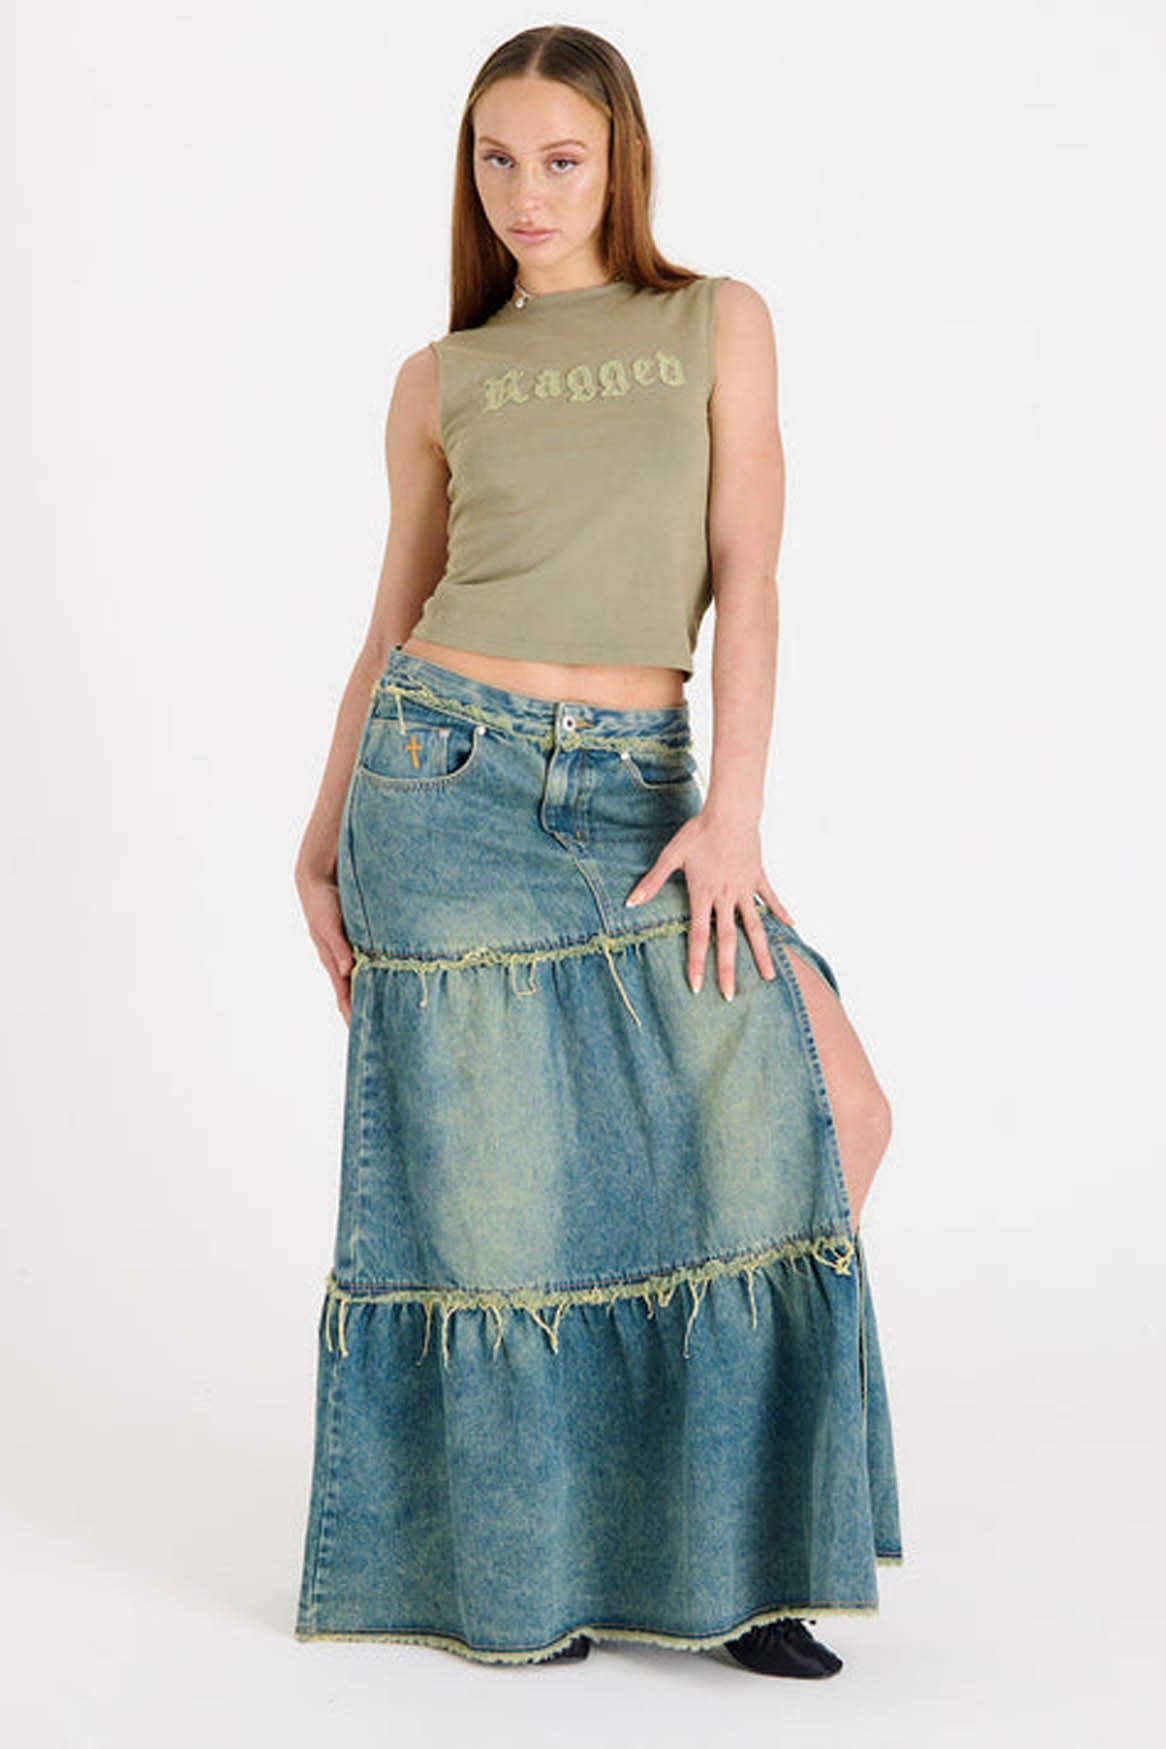 DIRTY WASHED TIERED MAXI DENIM SKIRT - EXCLUSIVE Denim from THE RAGGED PRIEST - Just €89! SHOP NOW AT IAMINHATELOVE BOTH IN STORE FOR CYPRUS AND ONLINE WORLDWIDE @ IAMINHATELOVE.COM